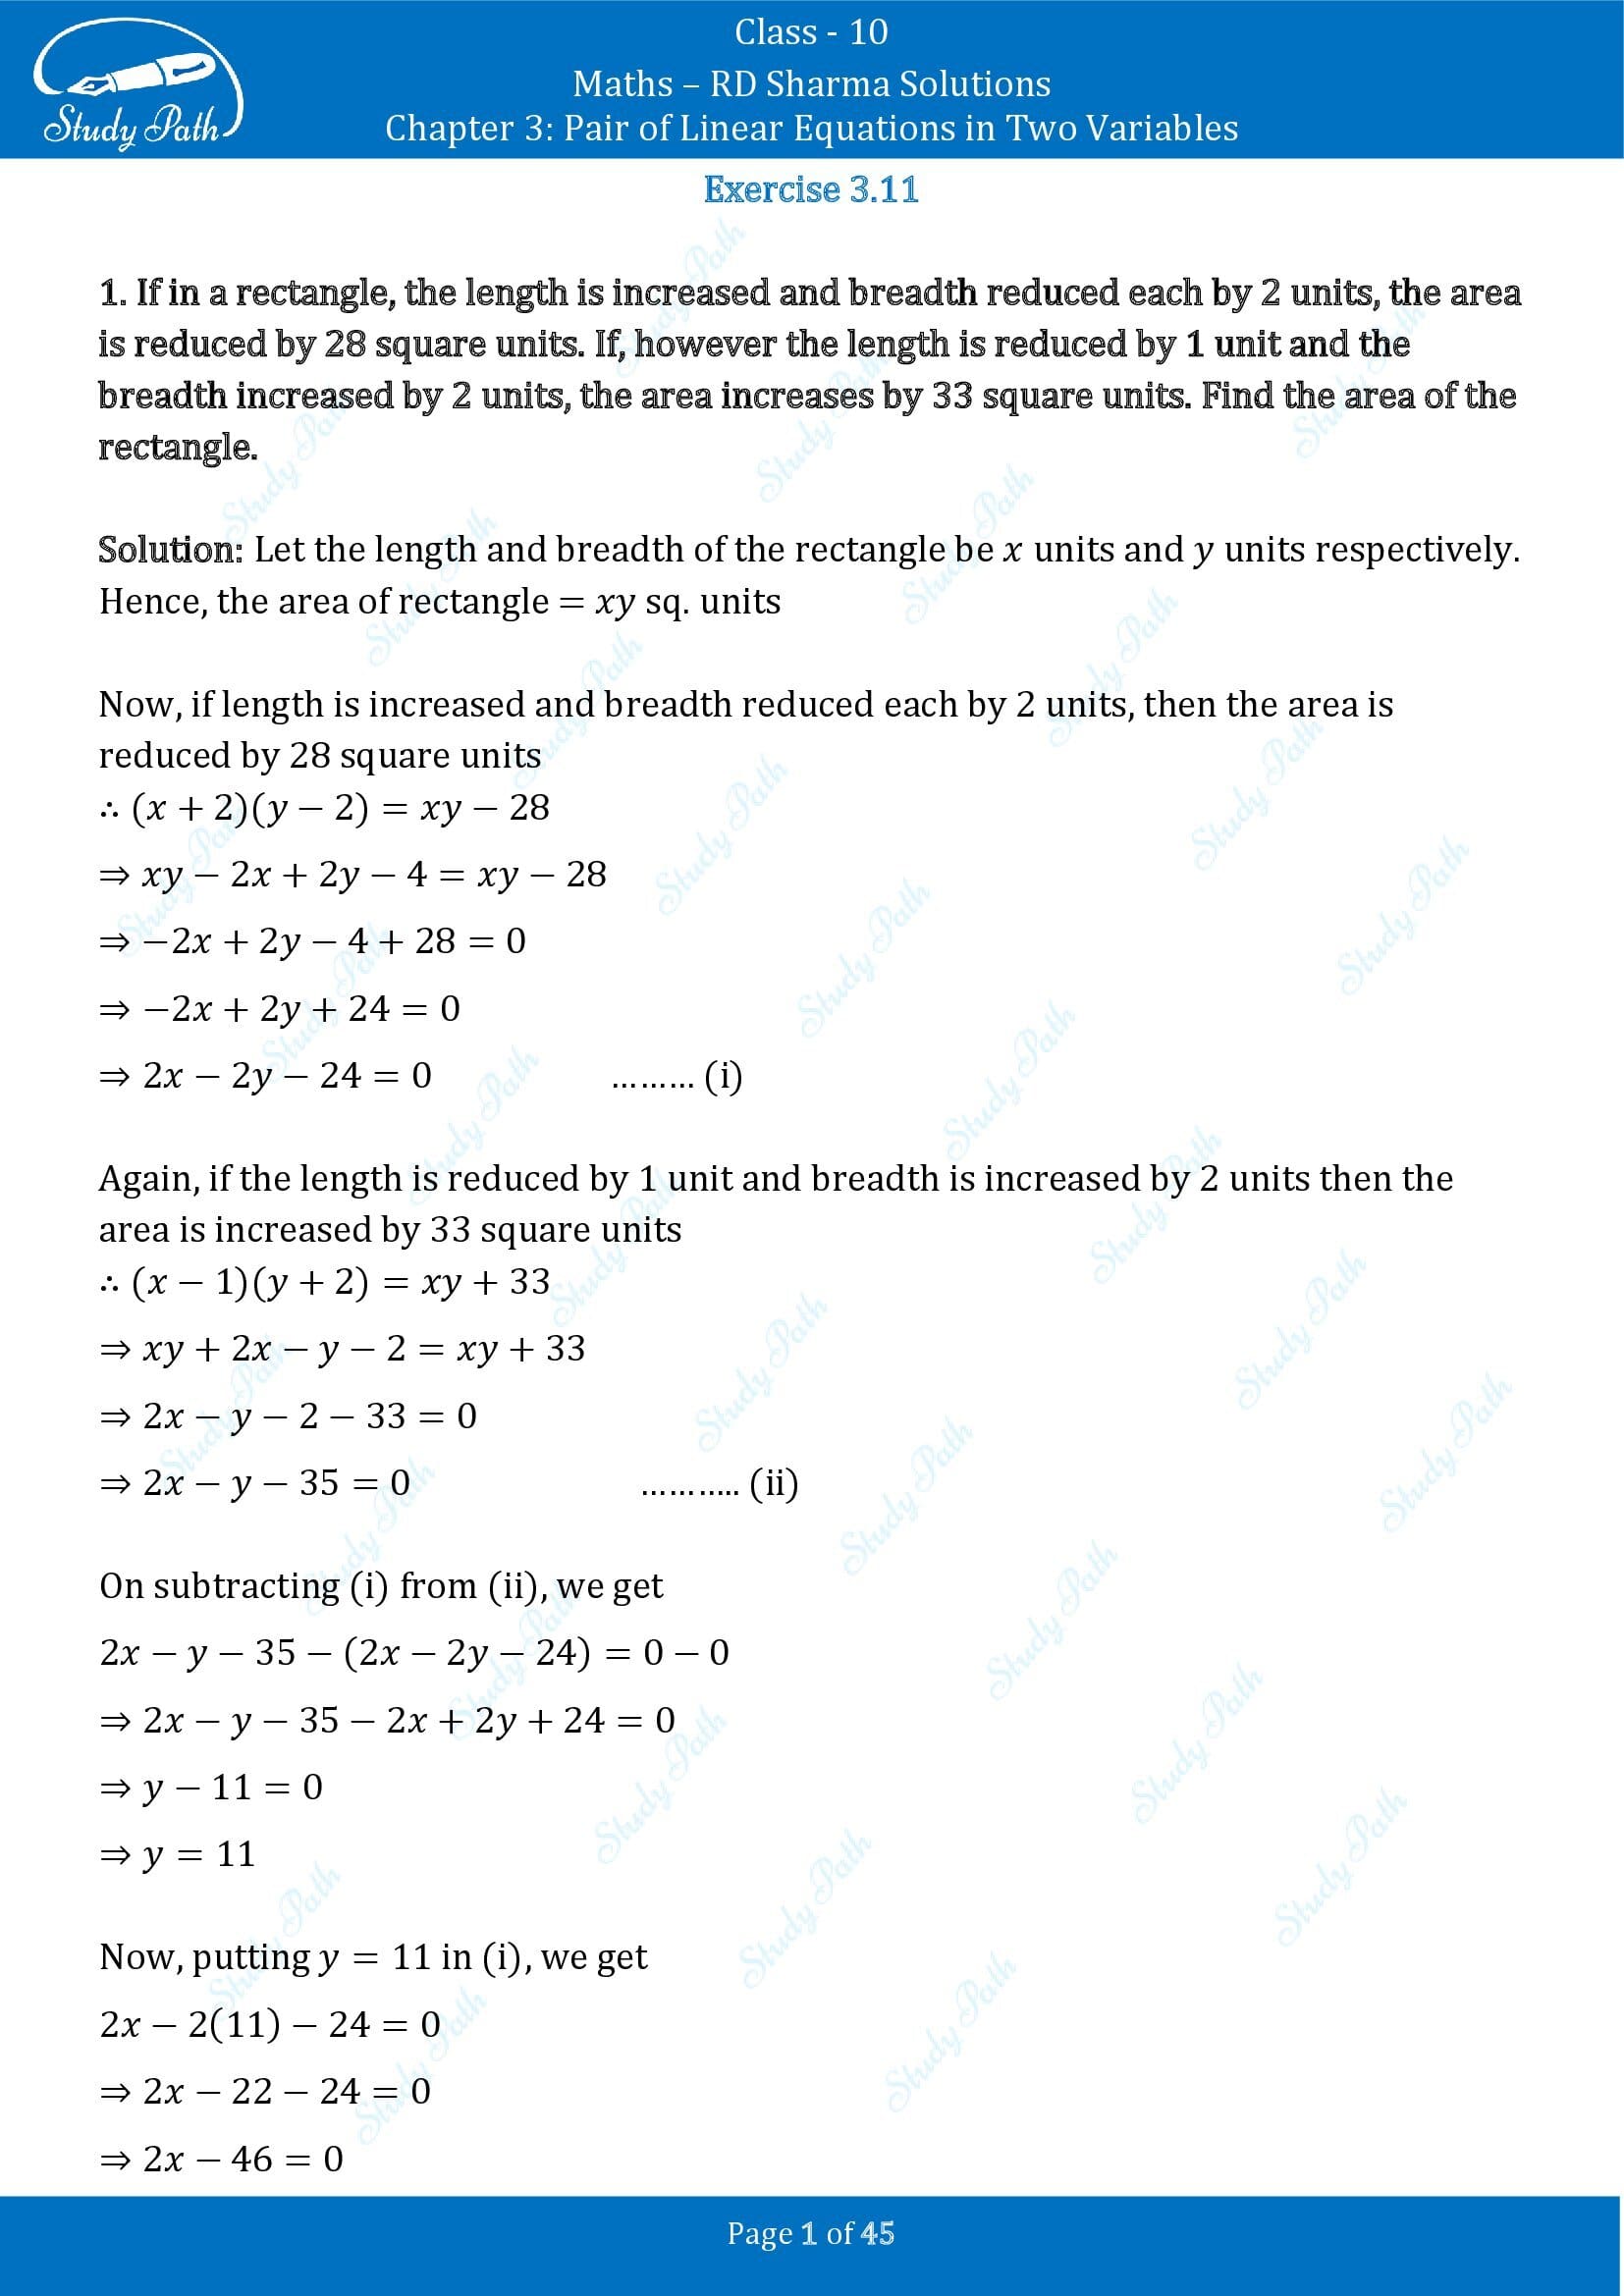 RD Sharma Solutions Class 10 Chapter 3 Pair of Linear Equations in Two Variables Exercise 3.11 00001